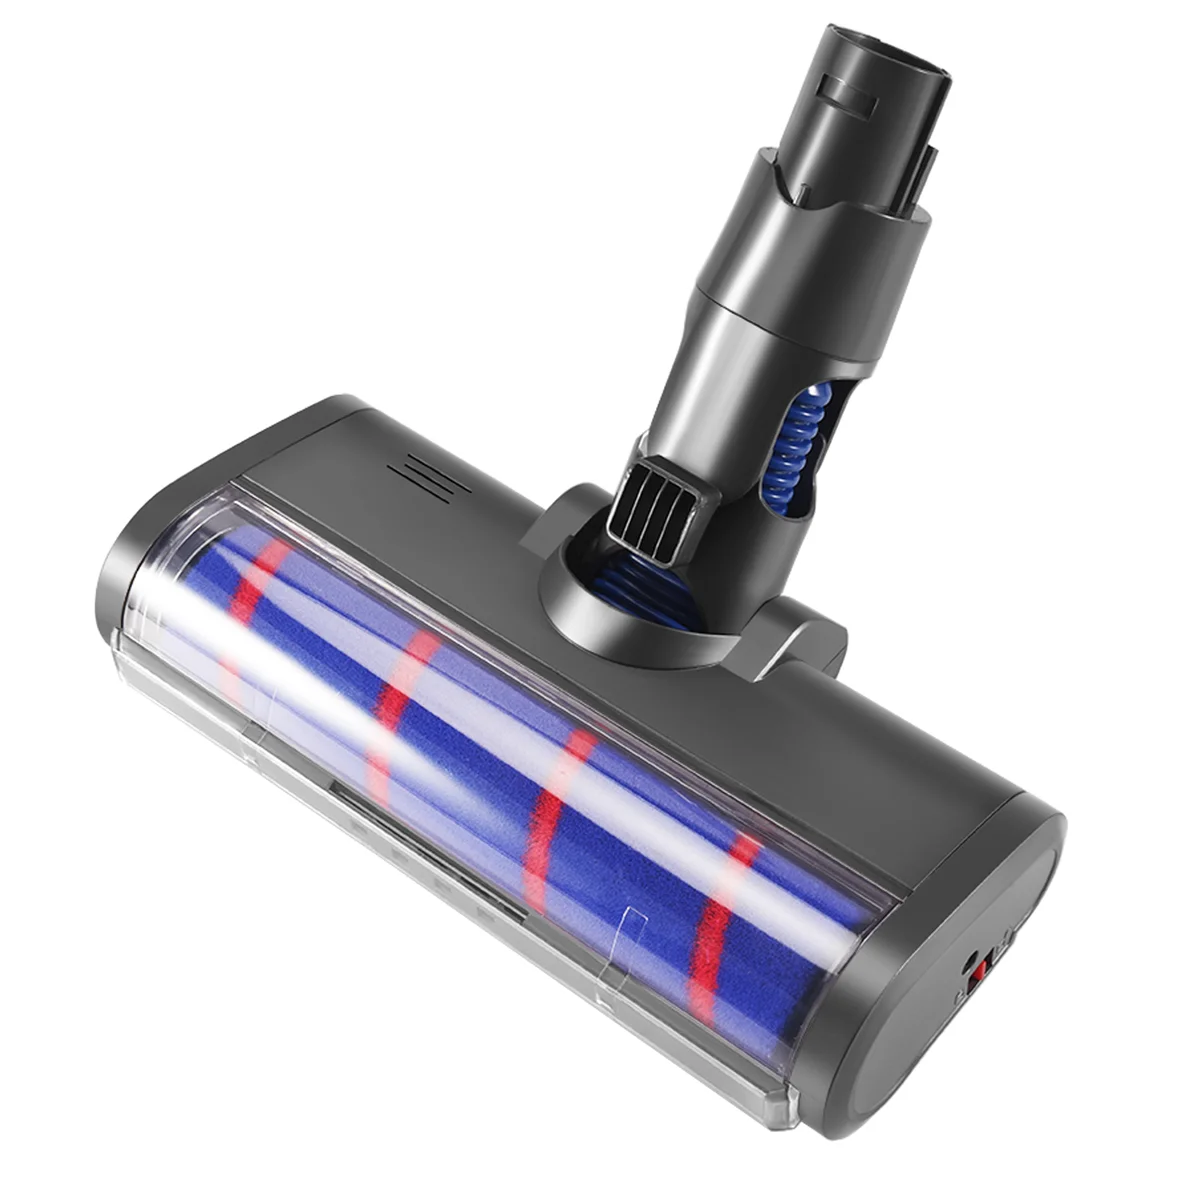 

Soft Roller Cleaner Head for Dyson V6 DC58 DC59 DC61 DC62 DC74 Cordless Vacuum Cleaner Attachment with LED Headlight